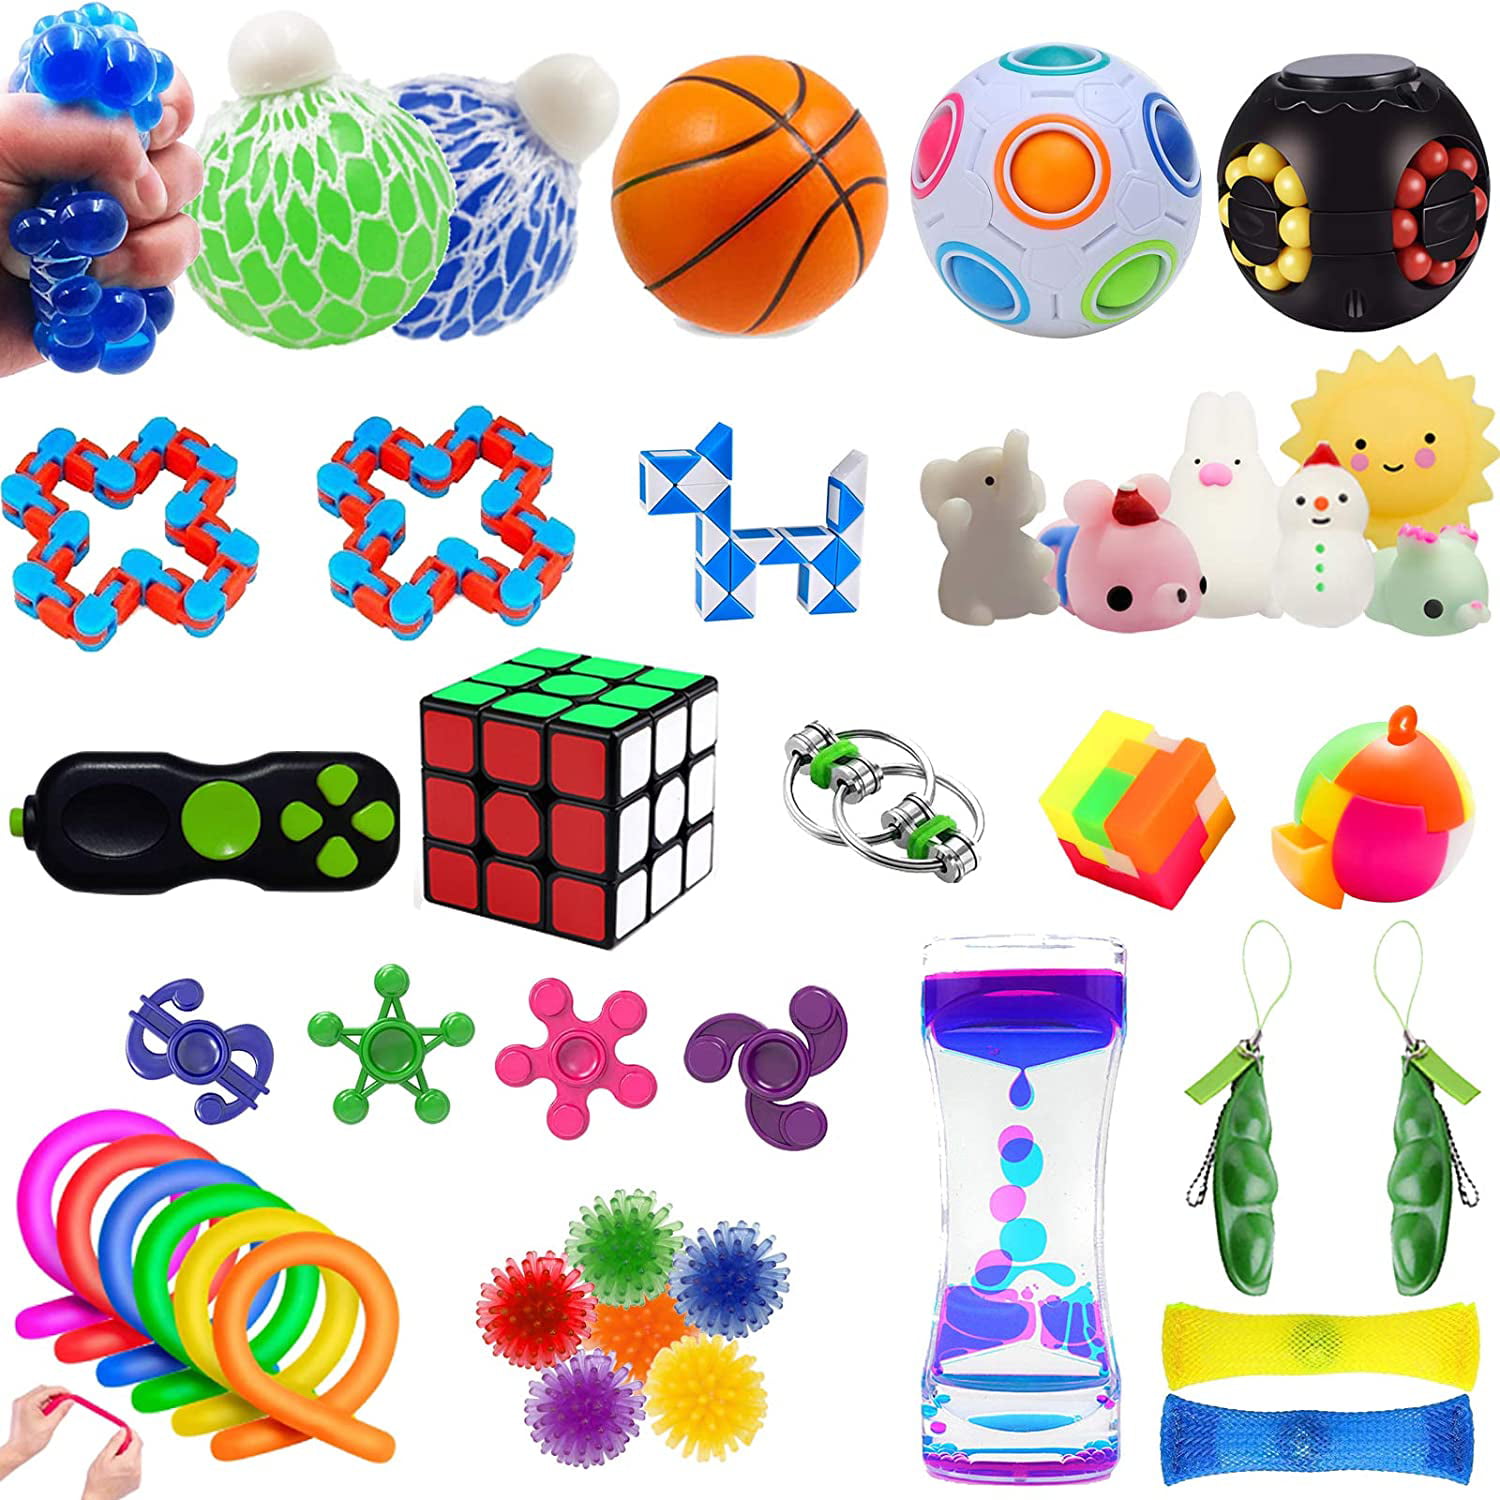 OBEDA Sensory Toys for for Autism Fidget Set Stress Relief Anti-Anxiety ADHD 